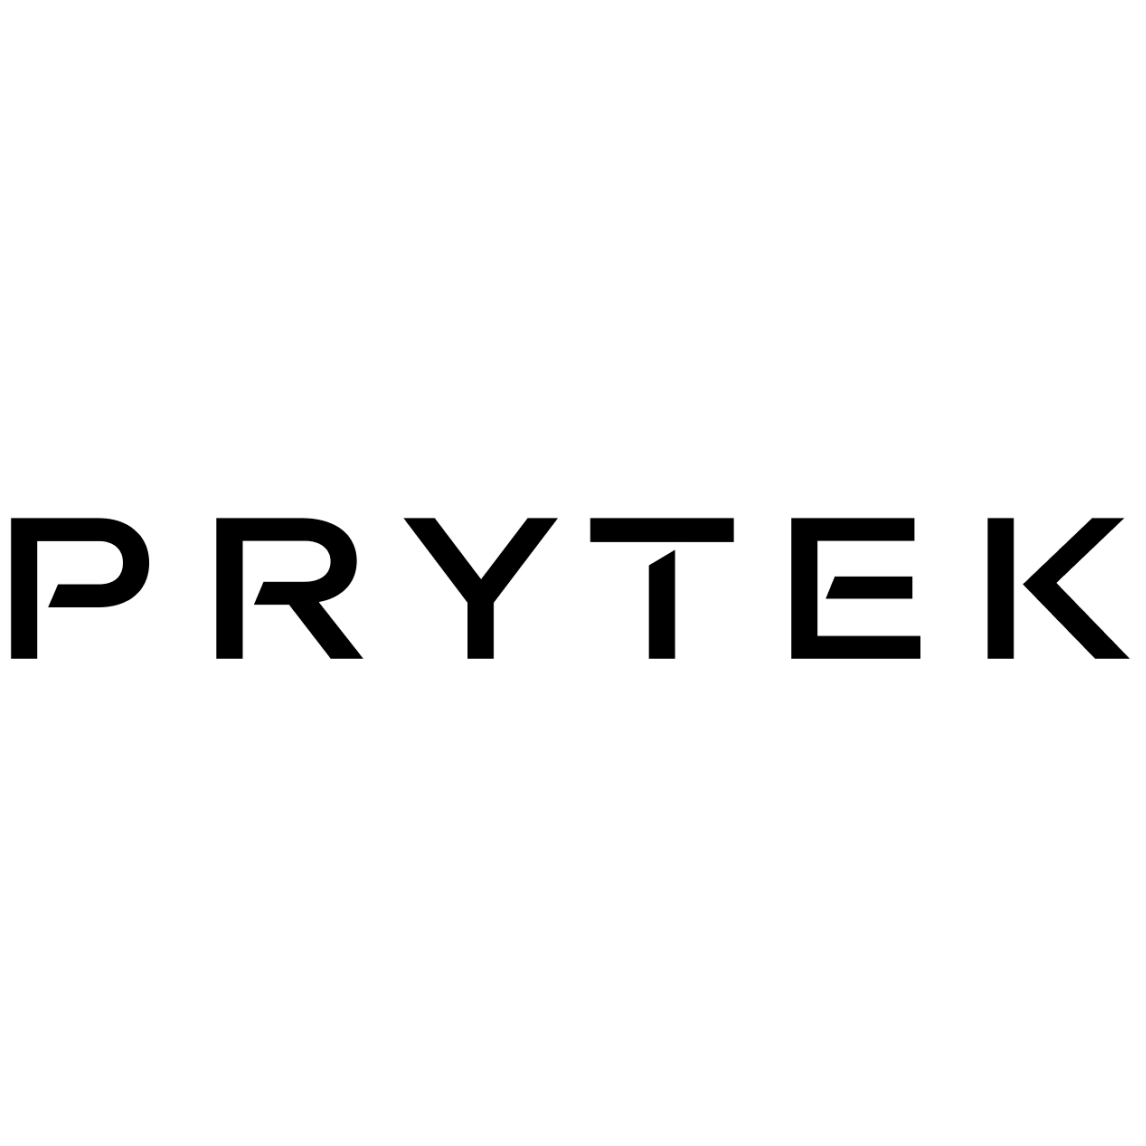 Prytek’s Approach to Investments Yields a Unique Asset Class